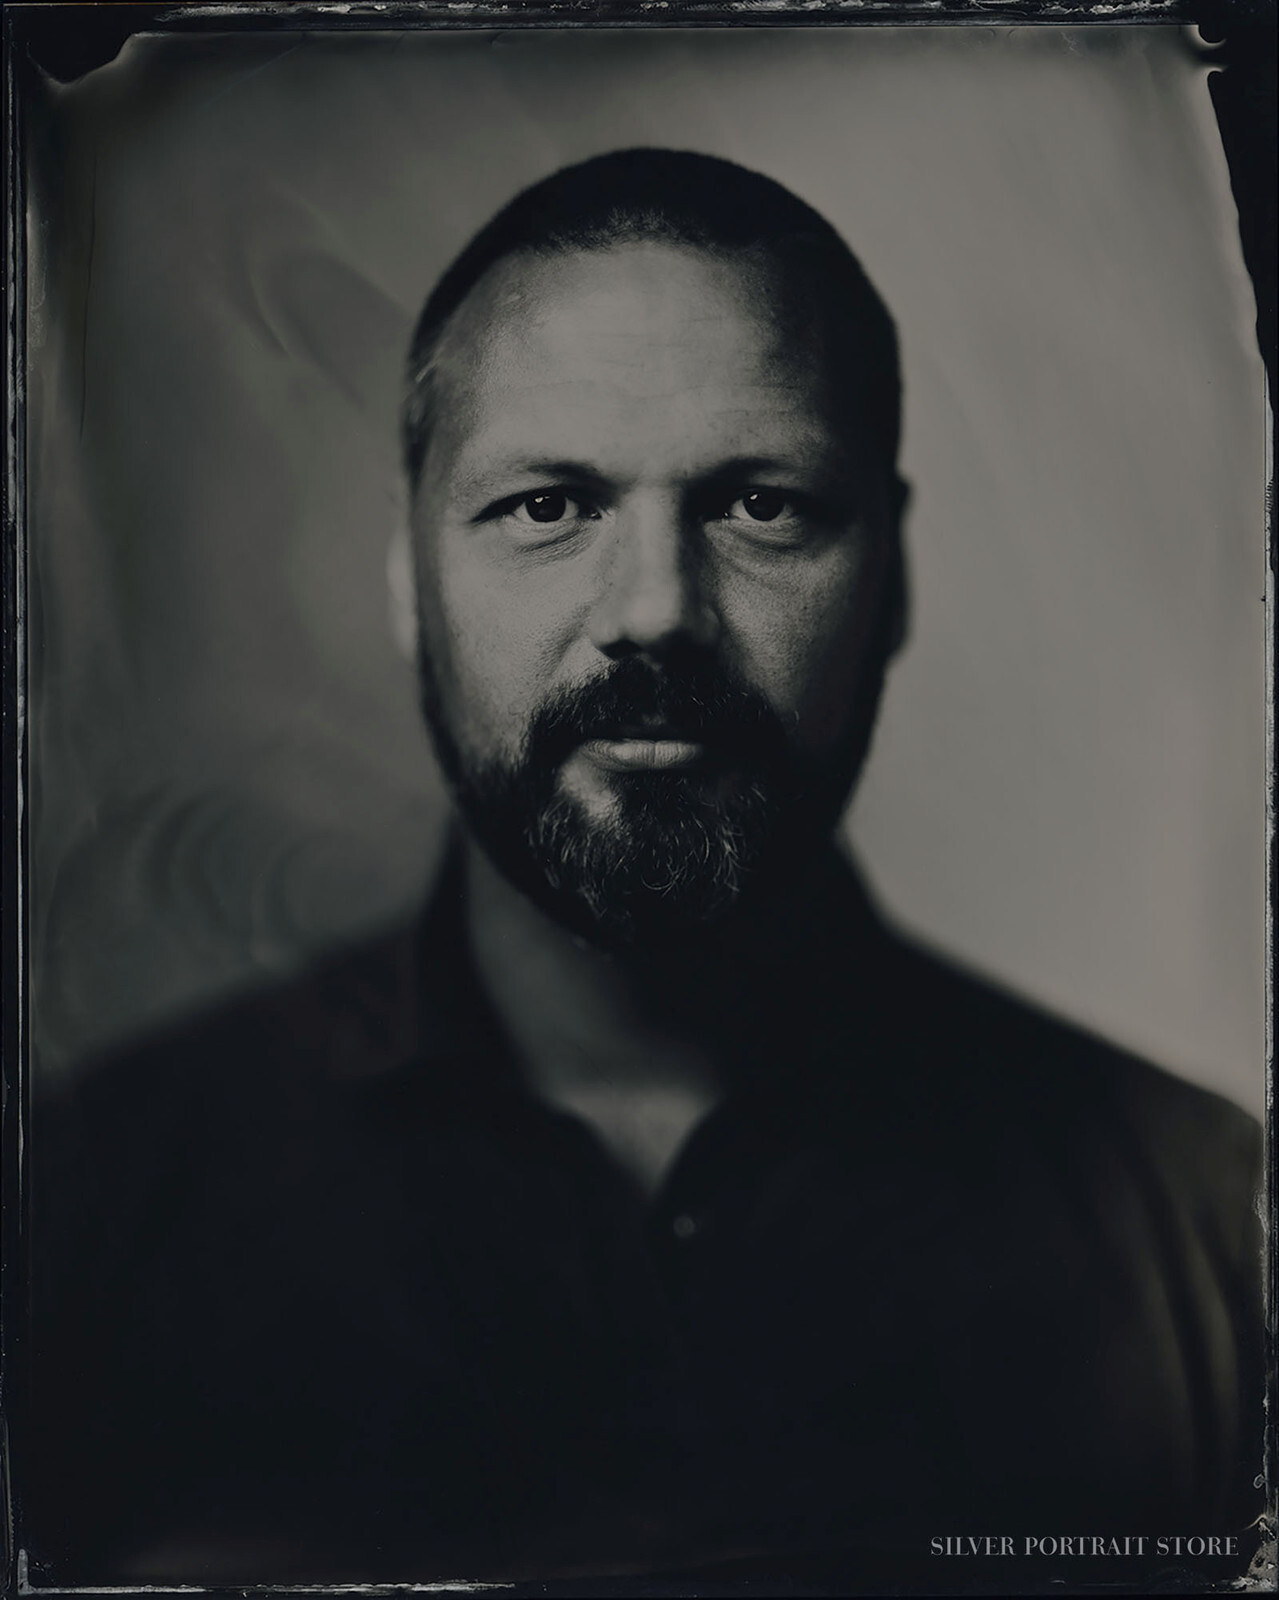 Willem-Silver Portrait Store-scan from Wet plate collodion-Tintype 20 x 25 cm.